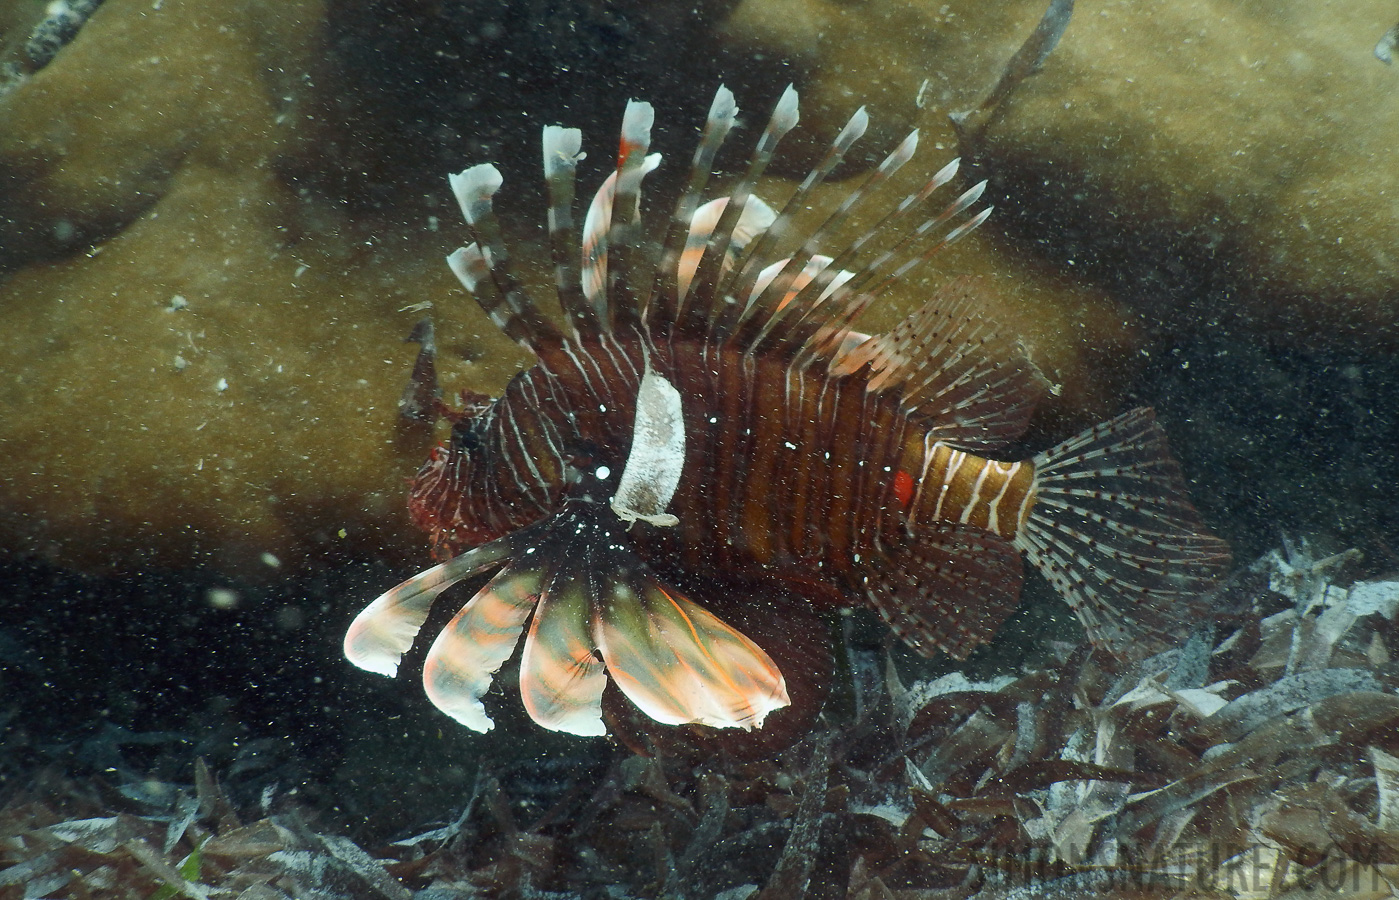 Pterois miles [7.7 mm, 1/100 Sek. bei f / 4.0, ISO 125]